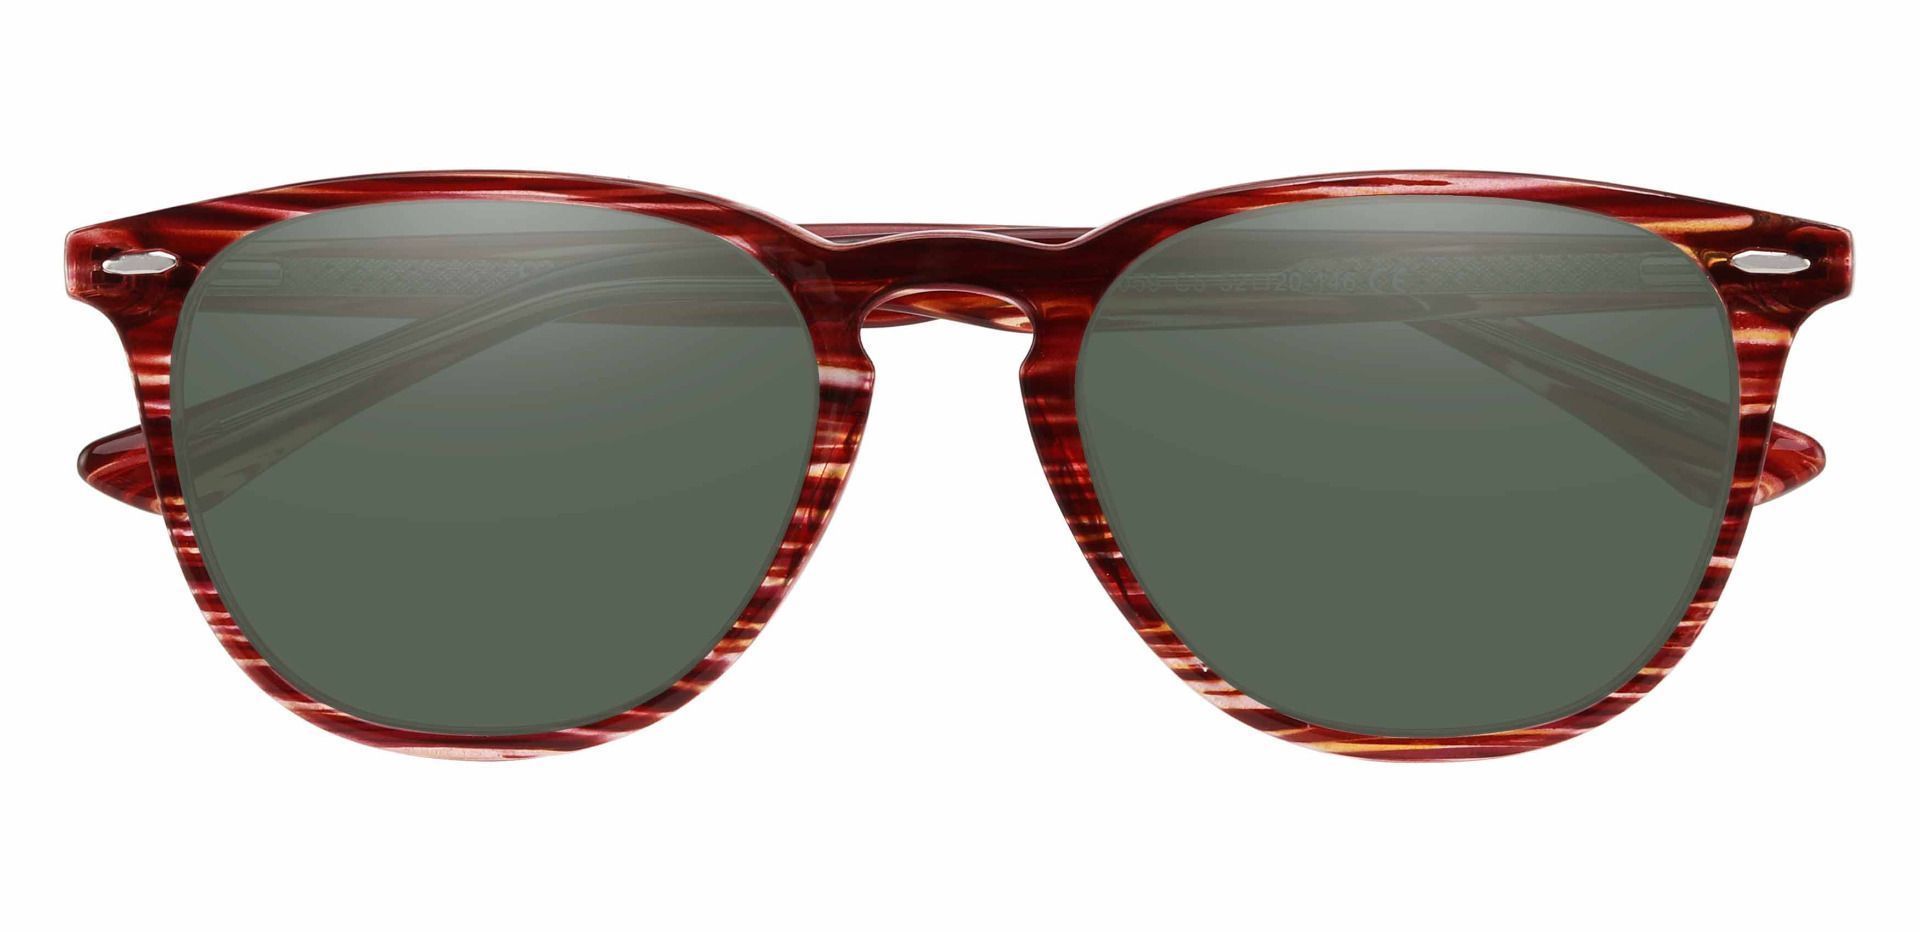 Sycamore Oval Non-Rx Sunglasses - Red Frame With Green Lenses